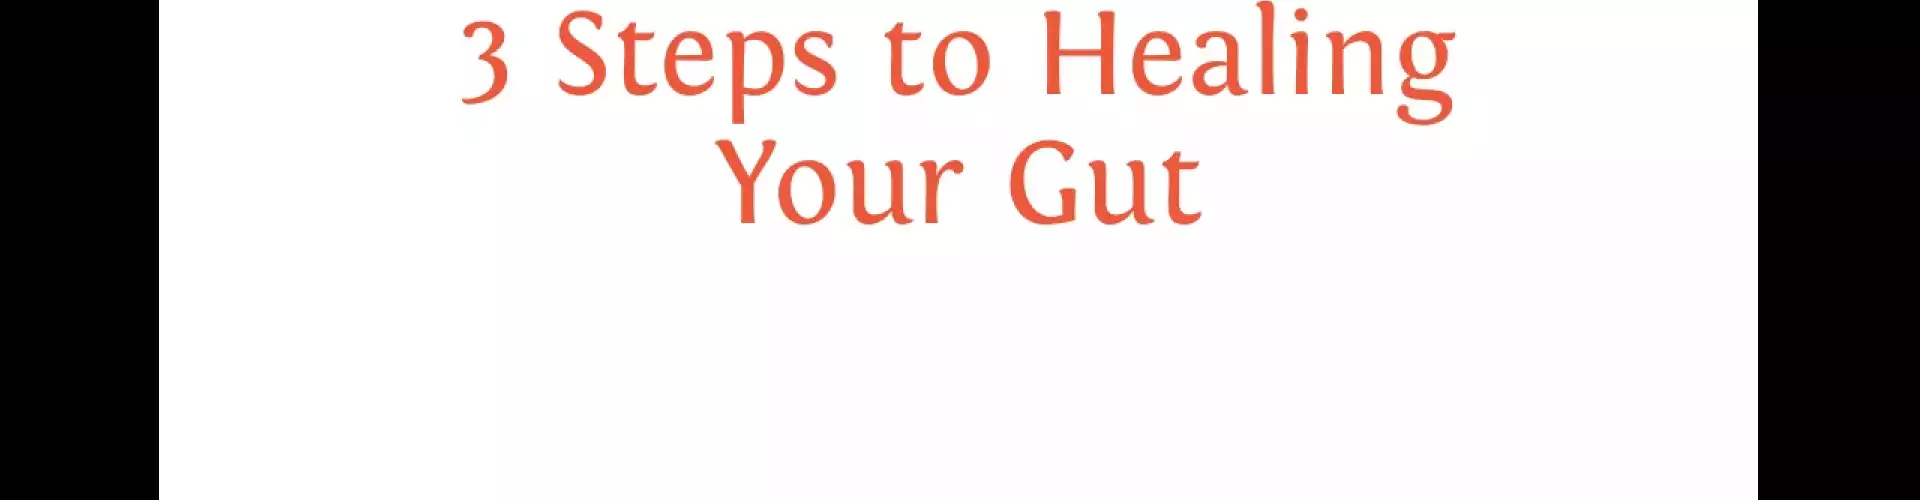 3 Steps to Healing Your Gut